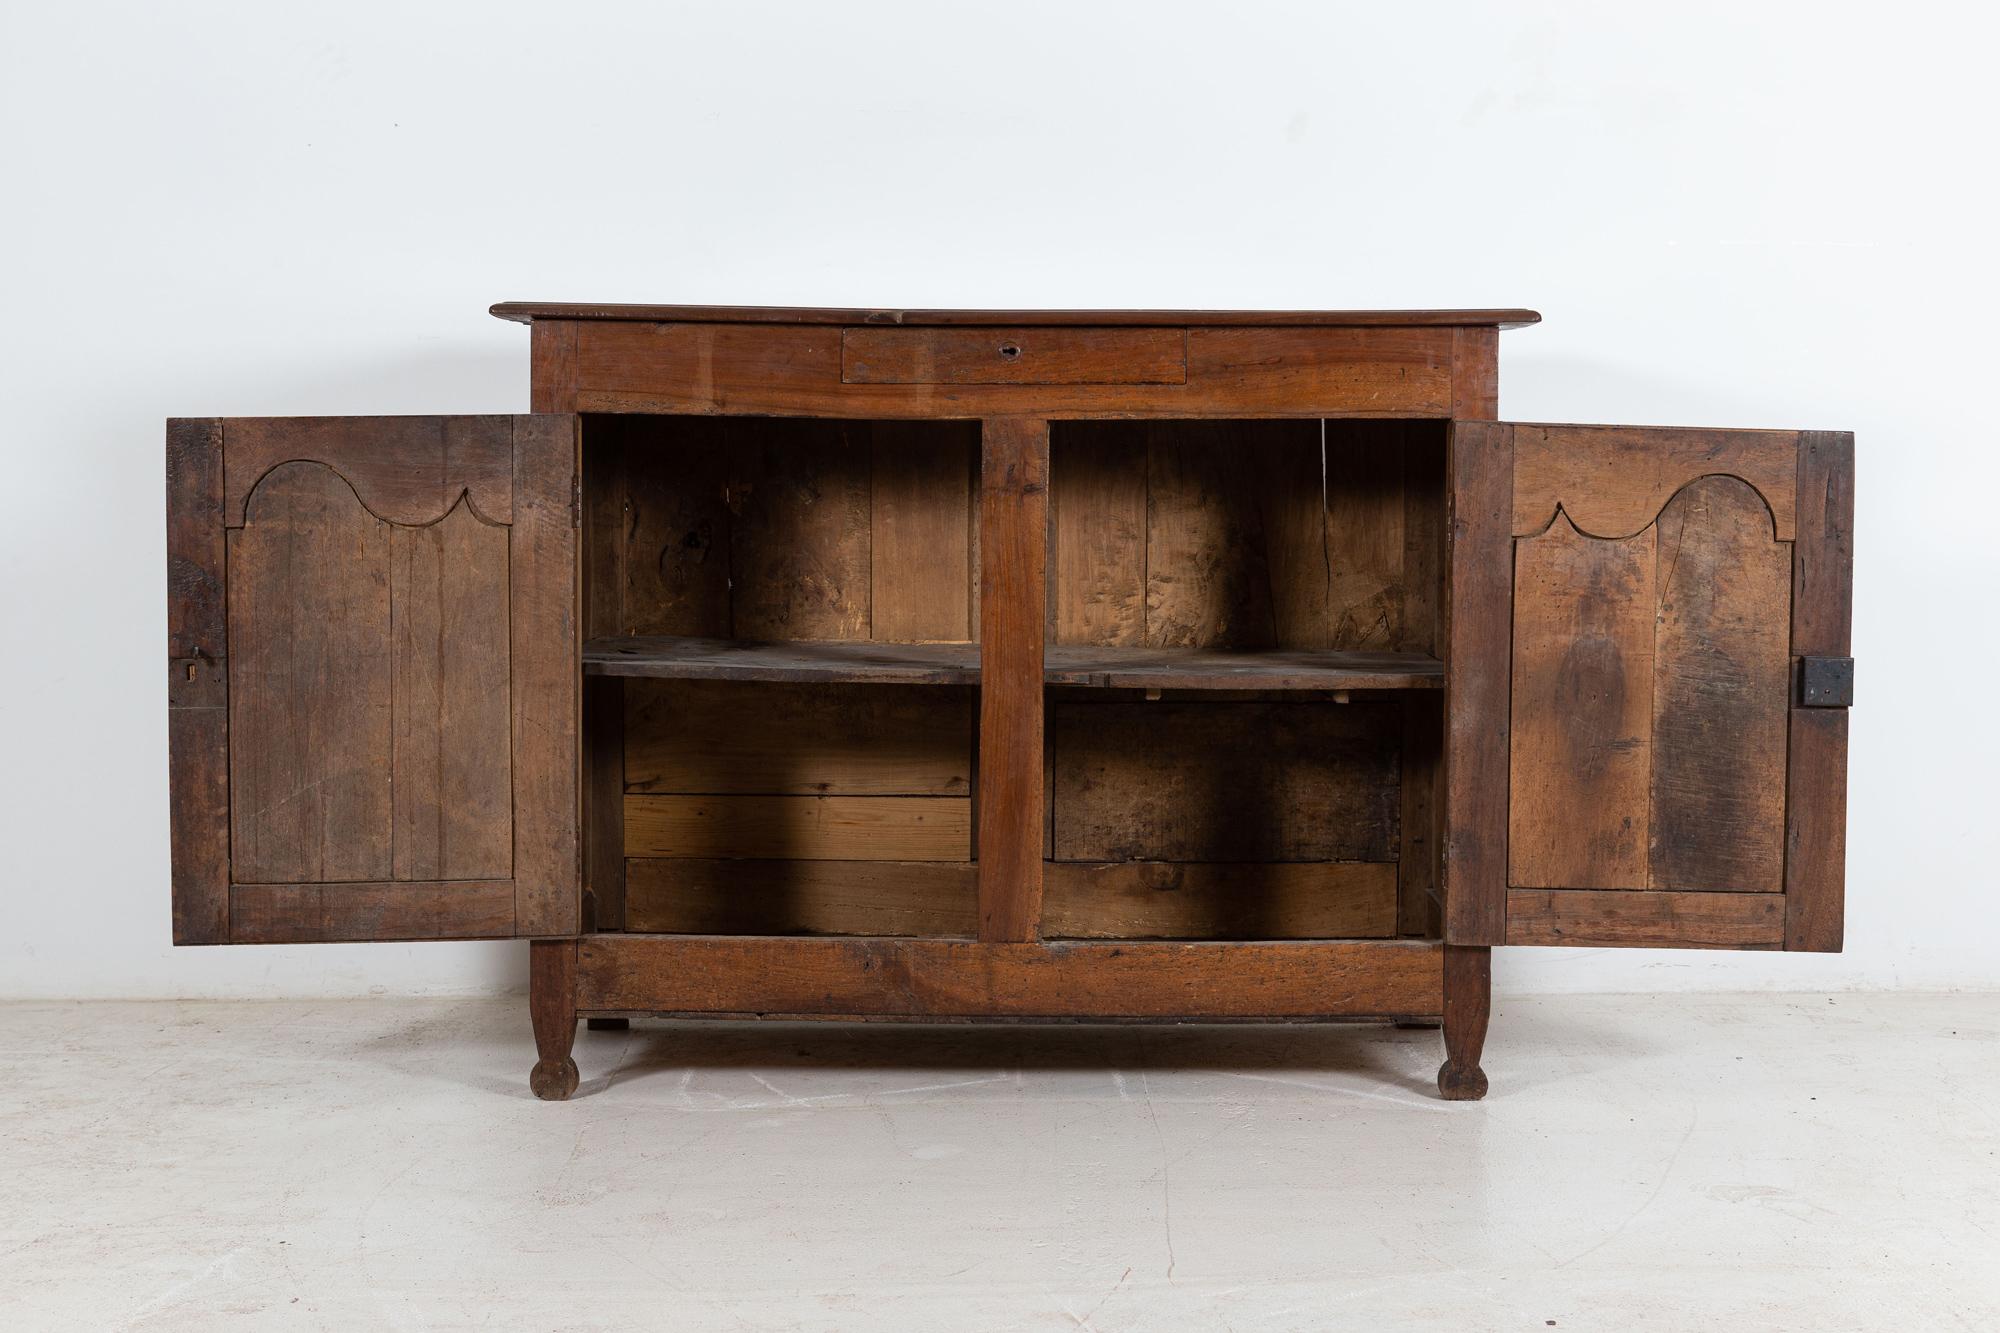 Circa 1740

18th Century French Provincial Walnut Buffet

Lovely patination and colour - with key

Signs of past repairs

Sourced from the South of France

sku 693B

W147 x D59 x H113 cm